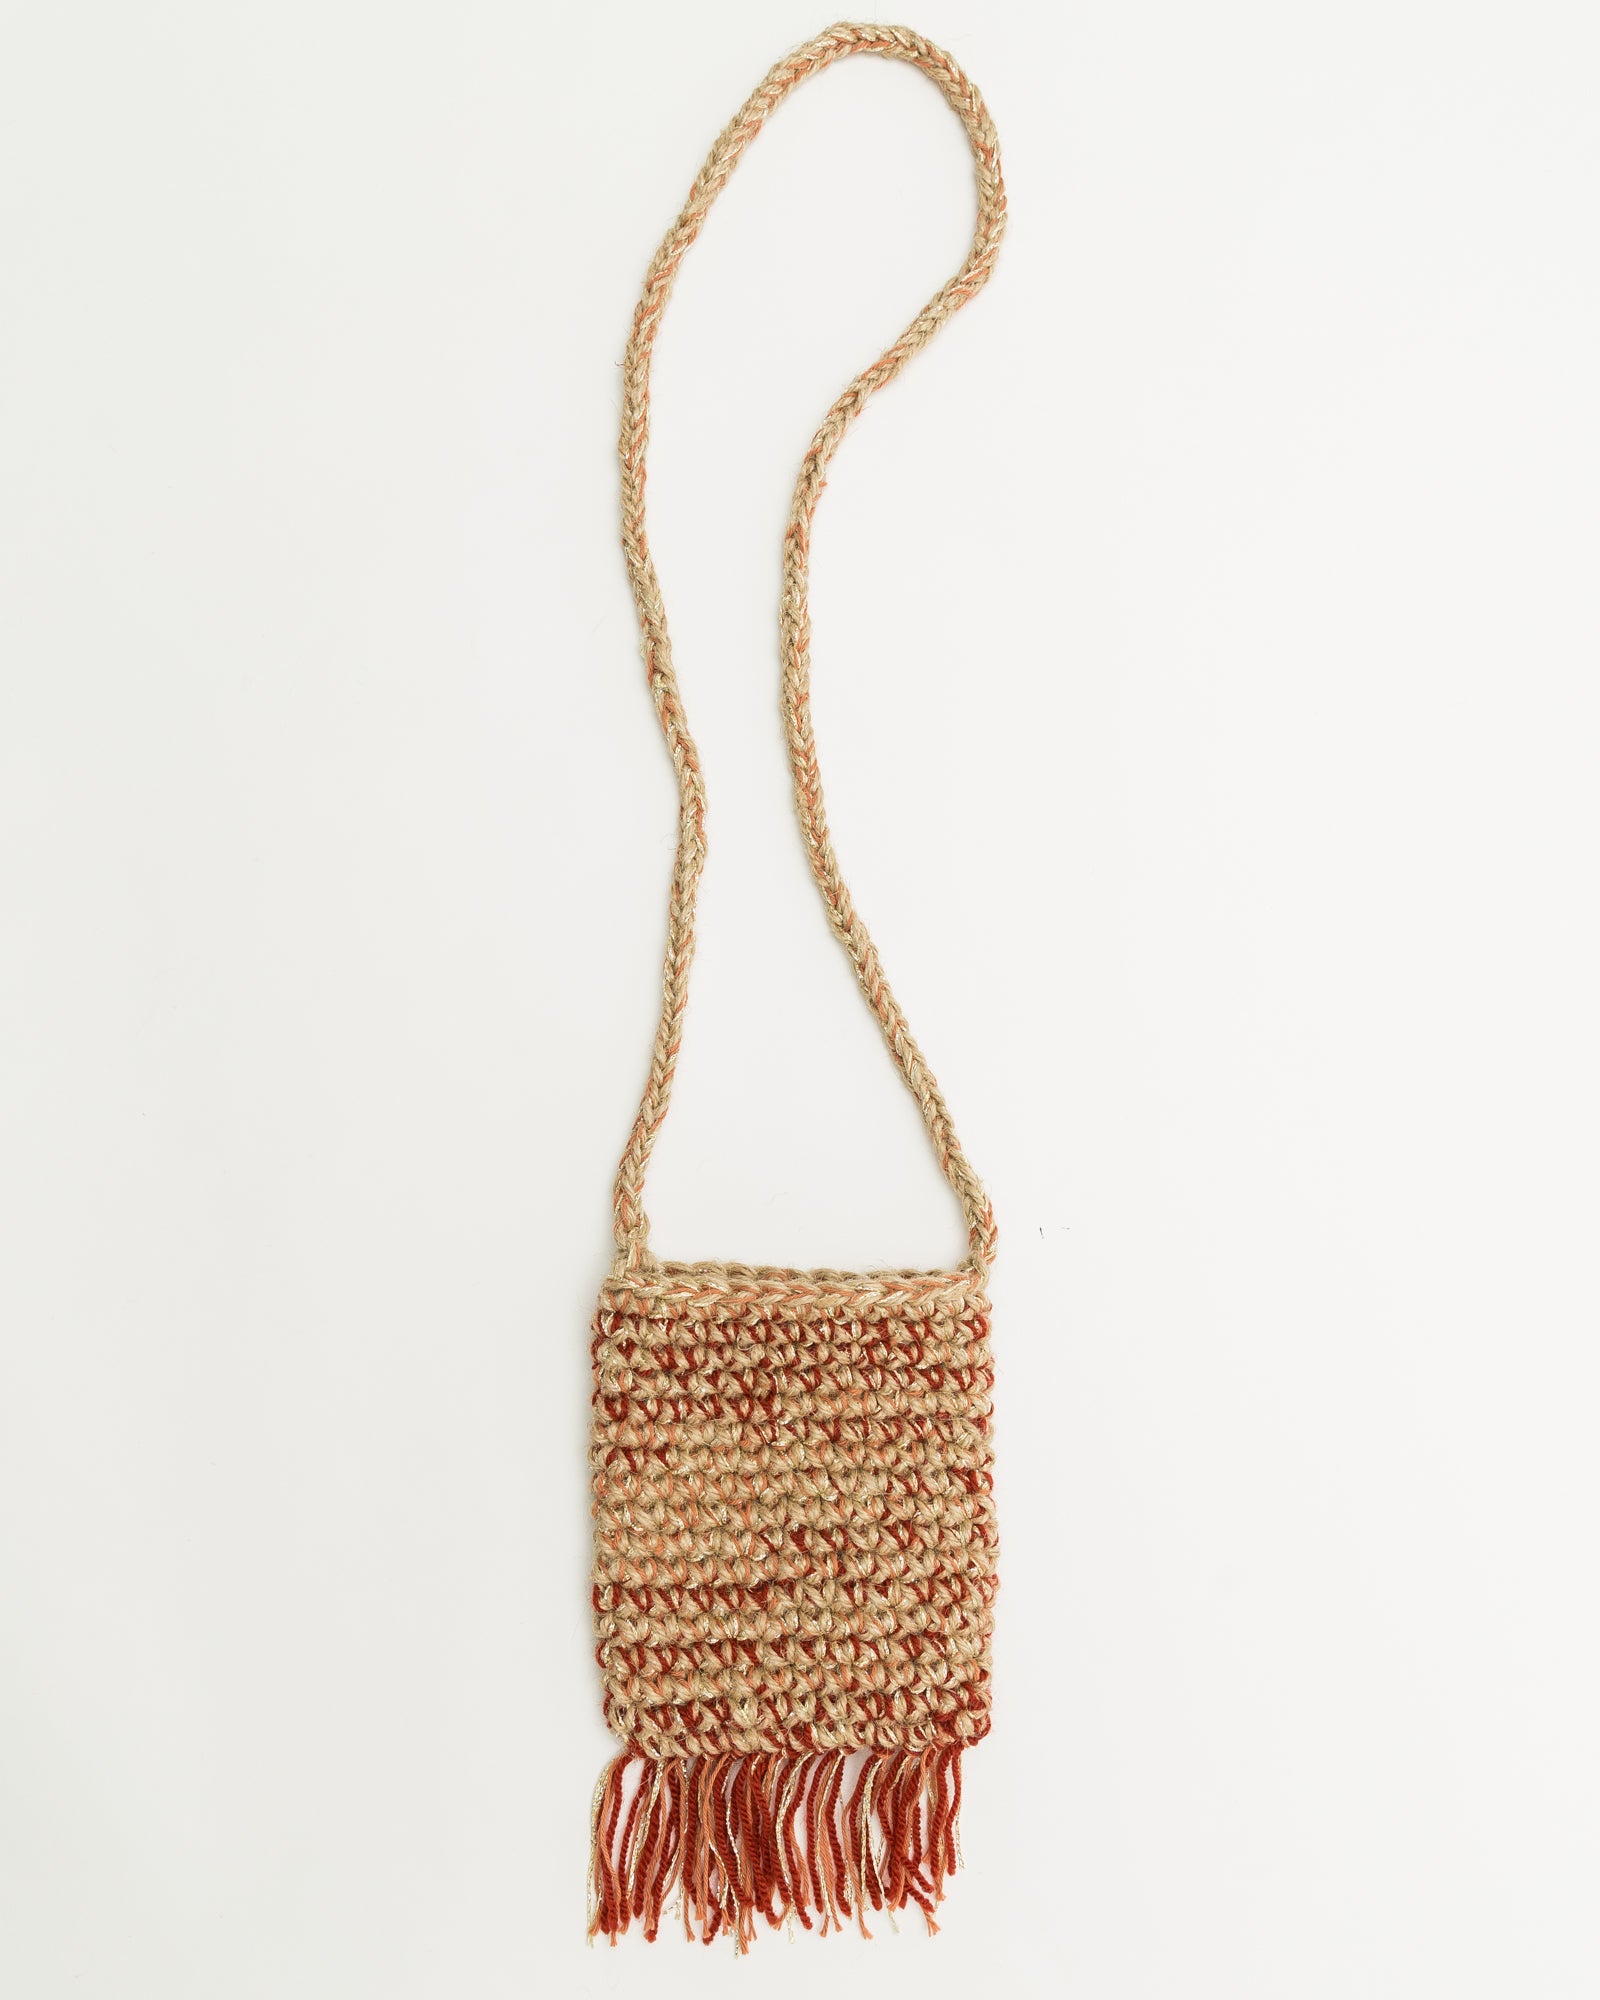 Nicholas Daley Hand Crochet Neck Pouch in Red